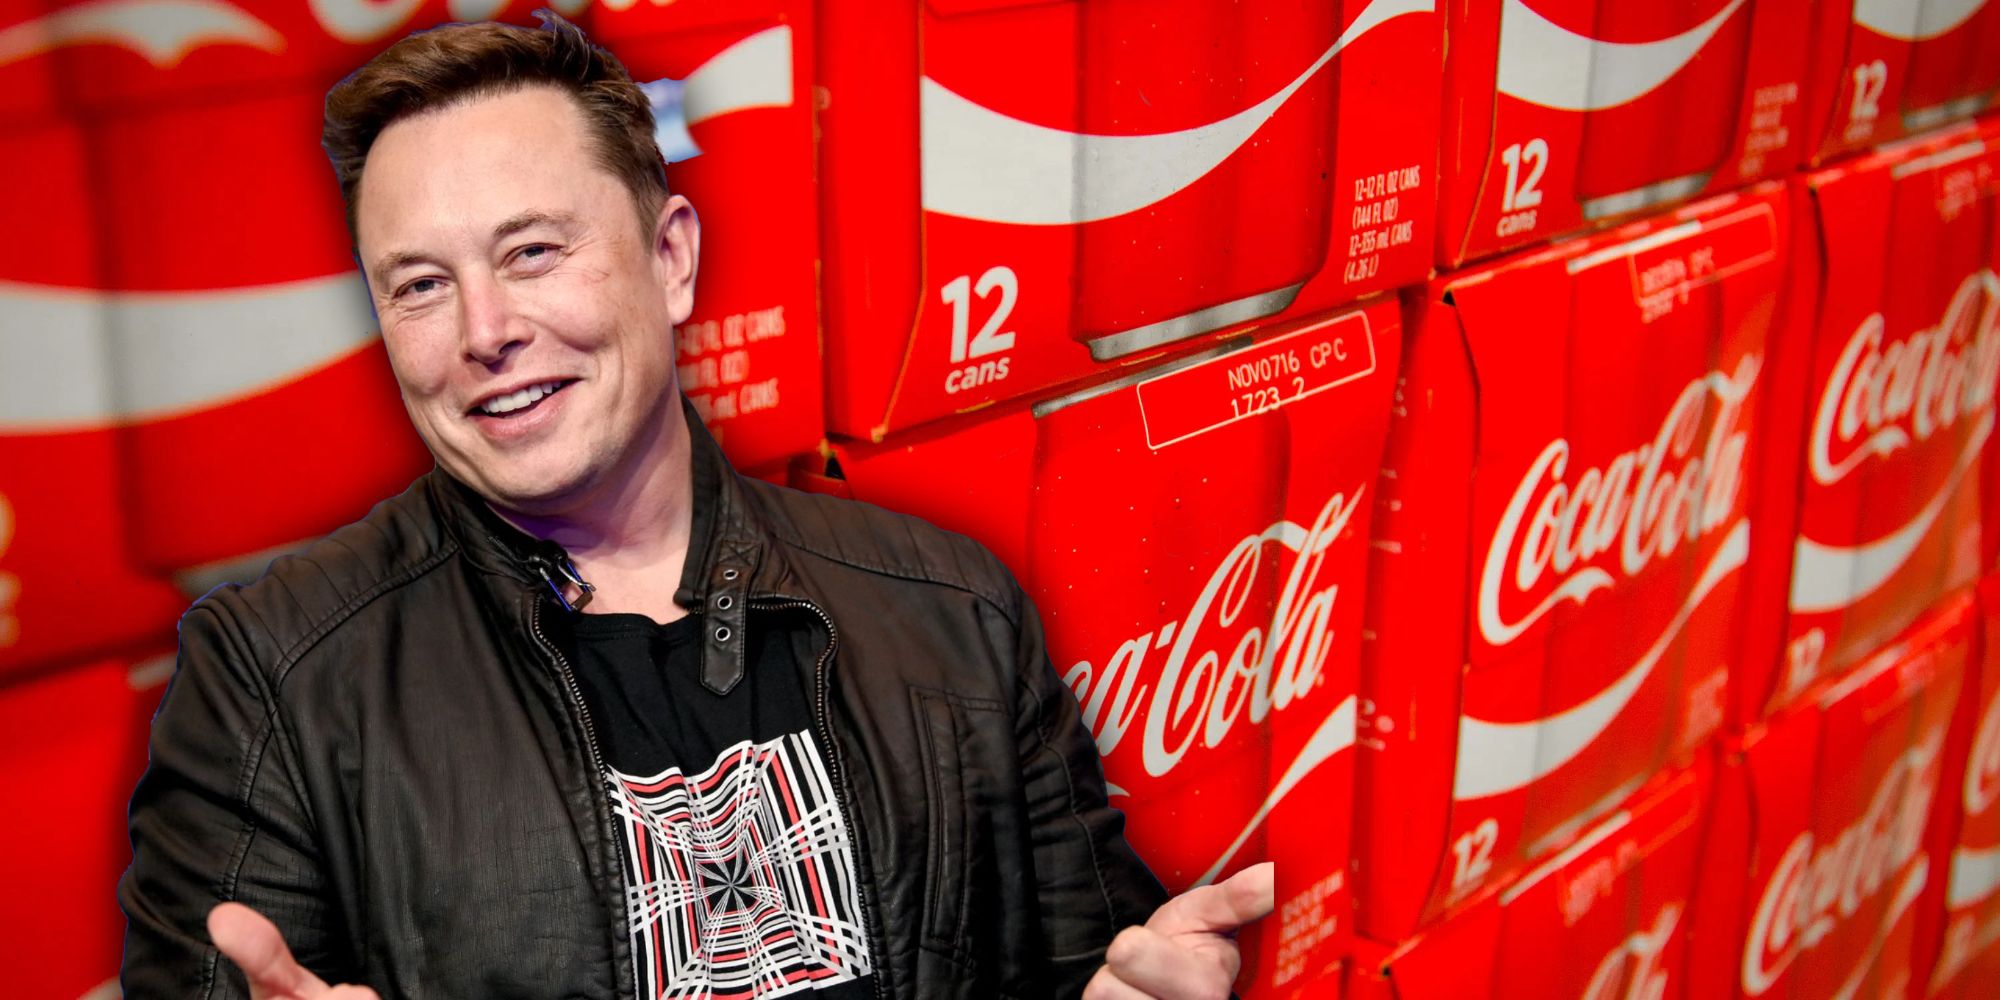 Elon Musk in front of packages of Coke